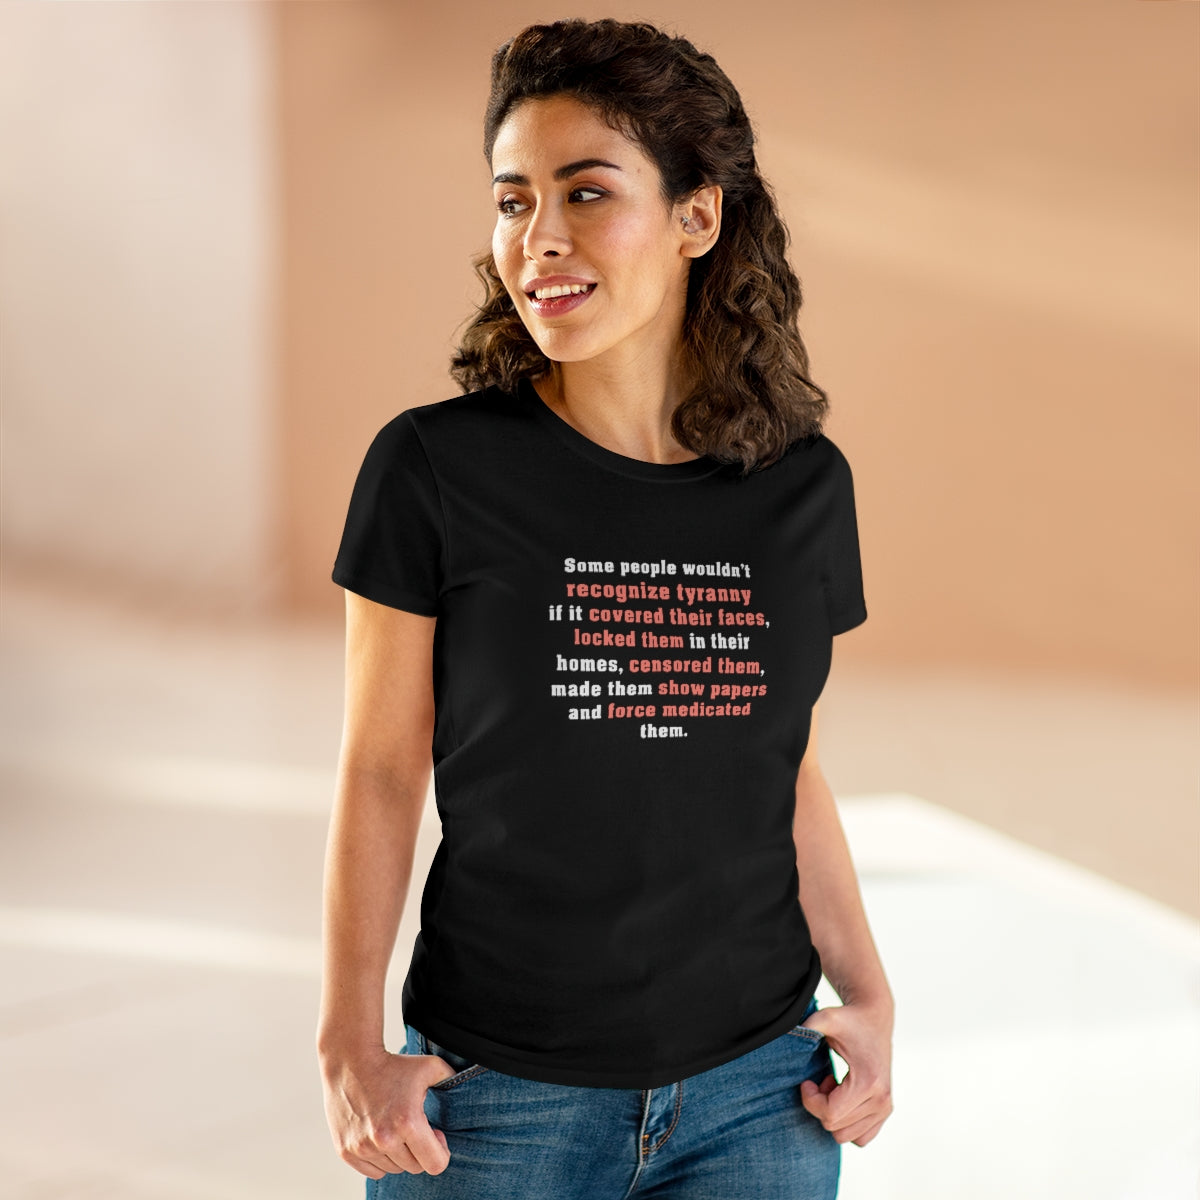 Some People Wouldn't Recognize Tyranny... | Women's Tee - Rise of The New Media